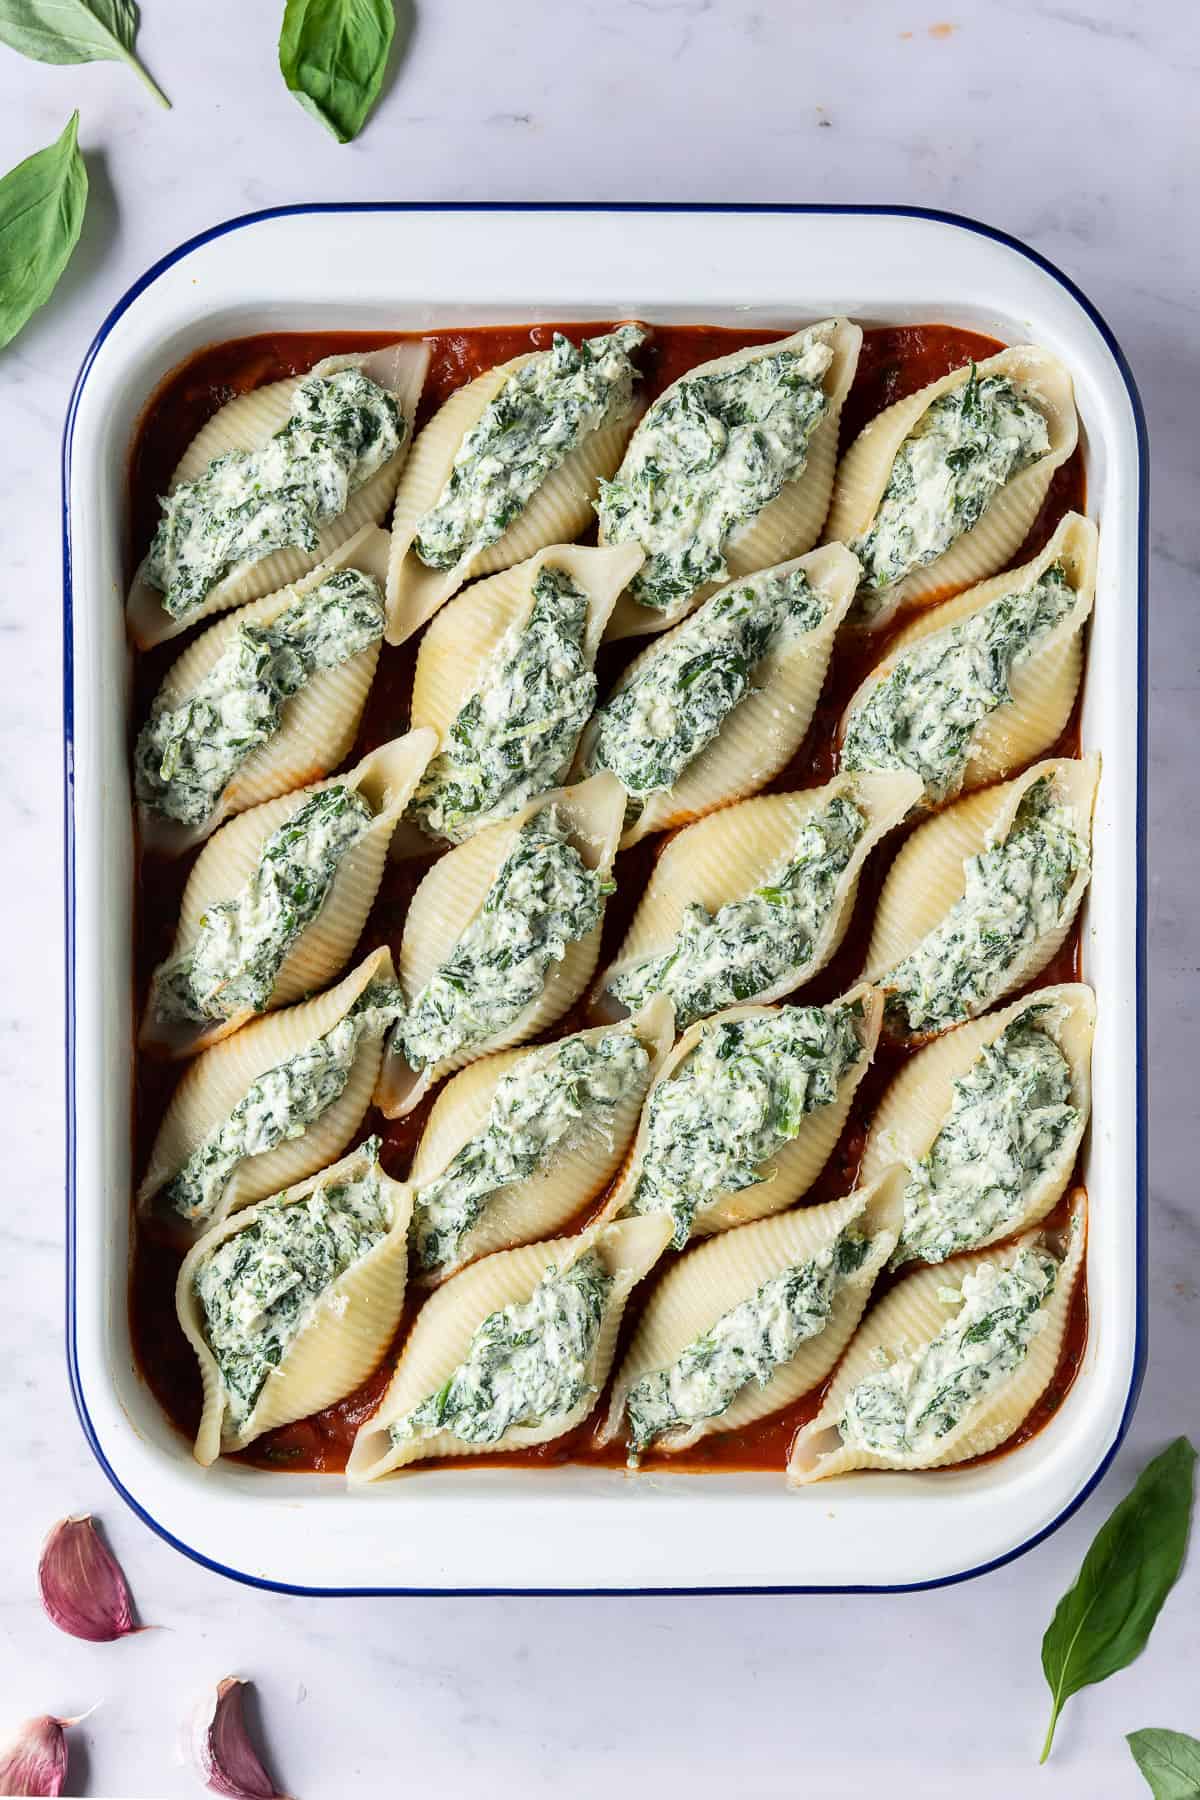 A dish of unbaked vegan spinach and ricotta stuffed pasta shells.